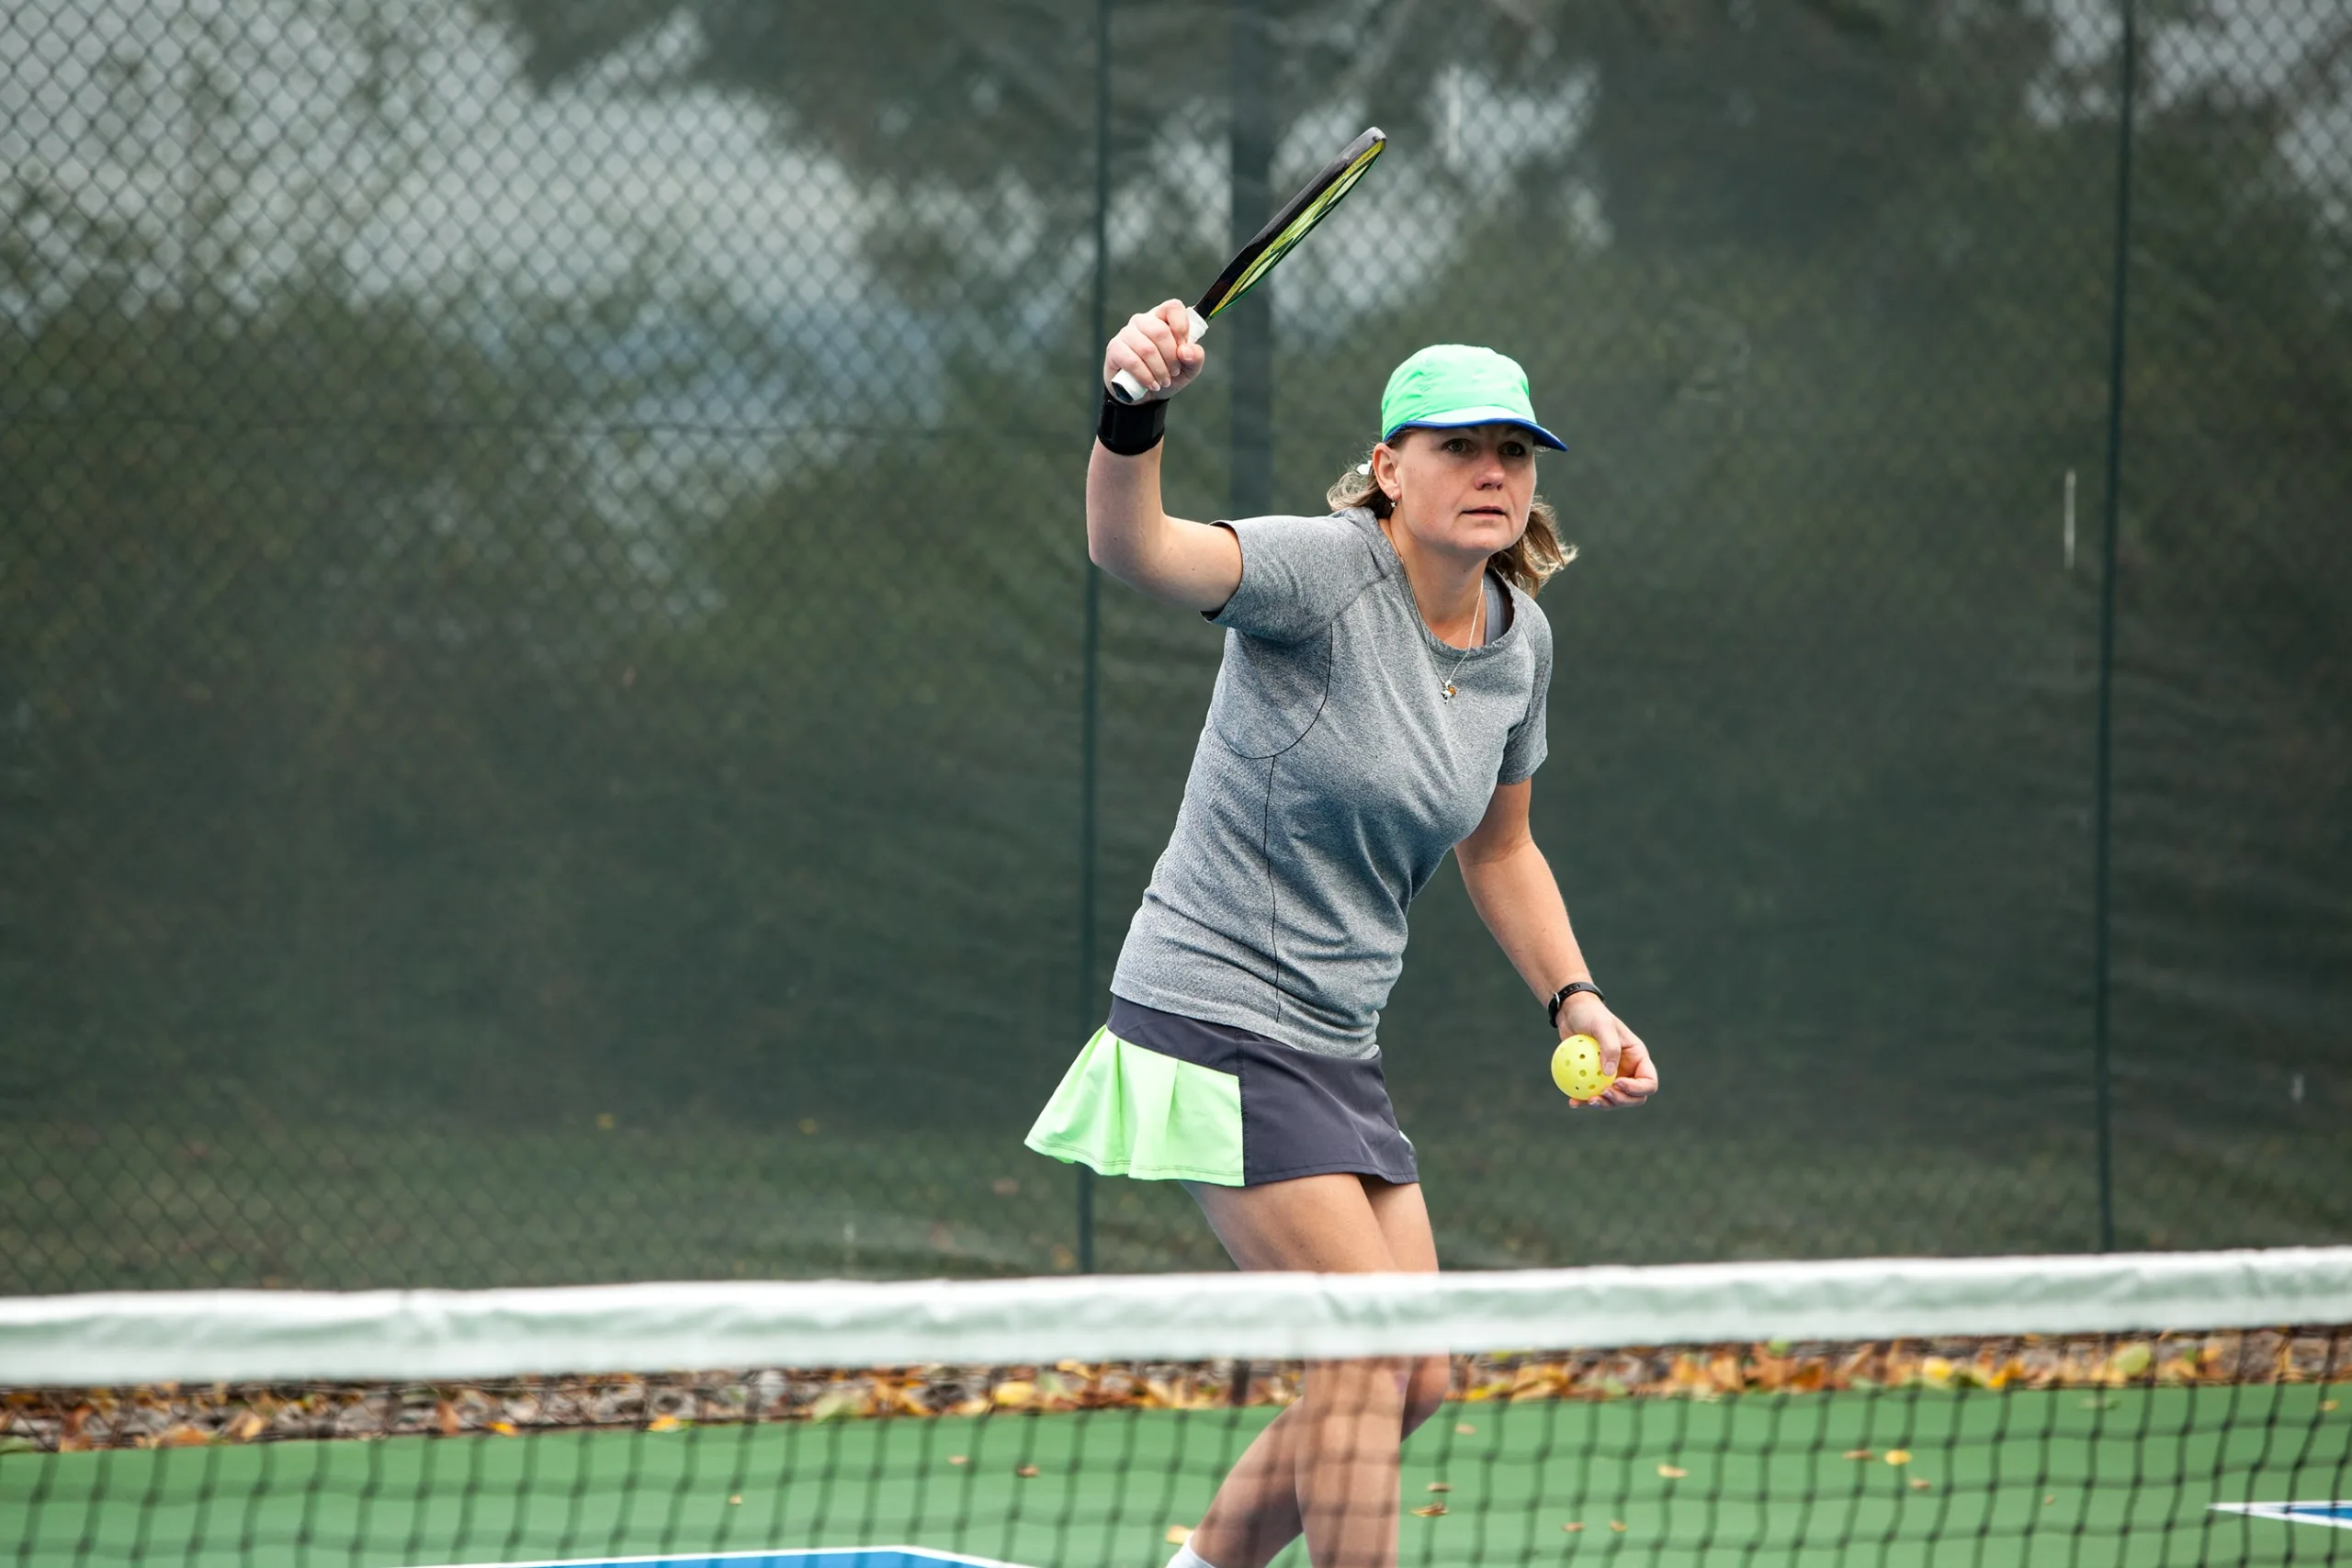 Woman serving a pickleball game wearing a green tennis hat, grey shirt, and black and lime green skirt.